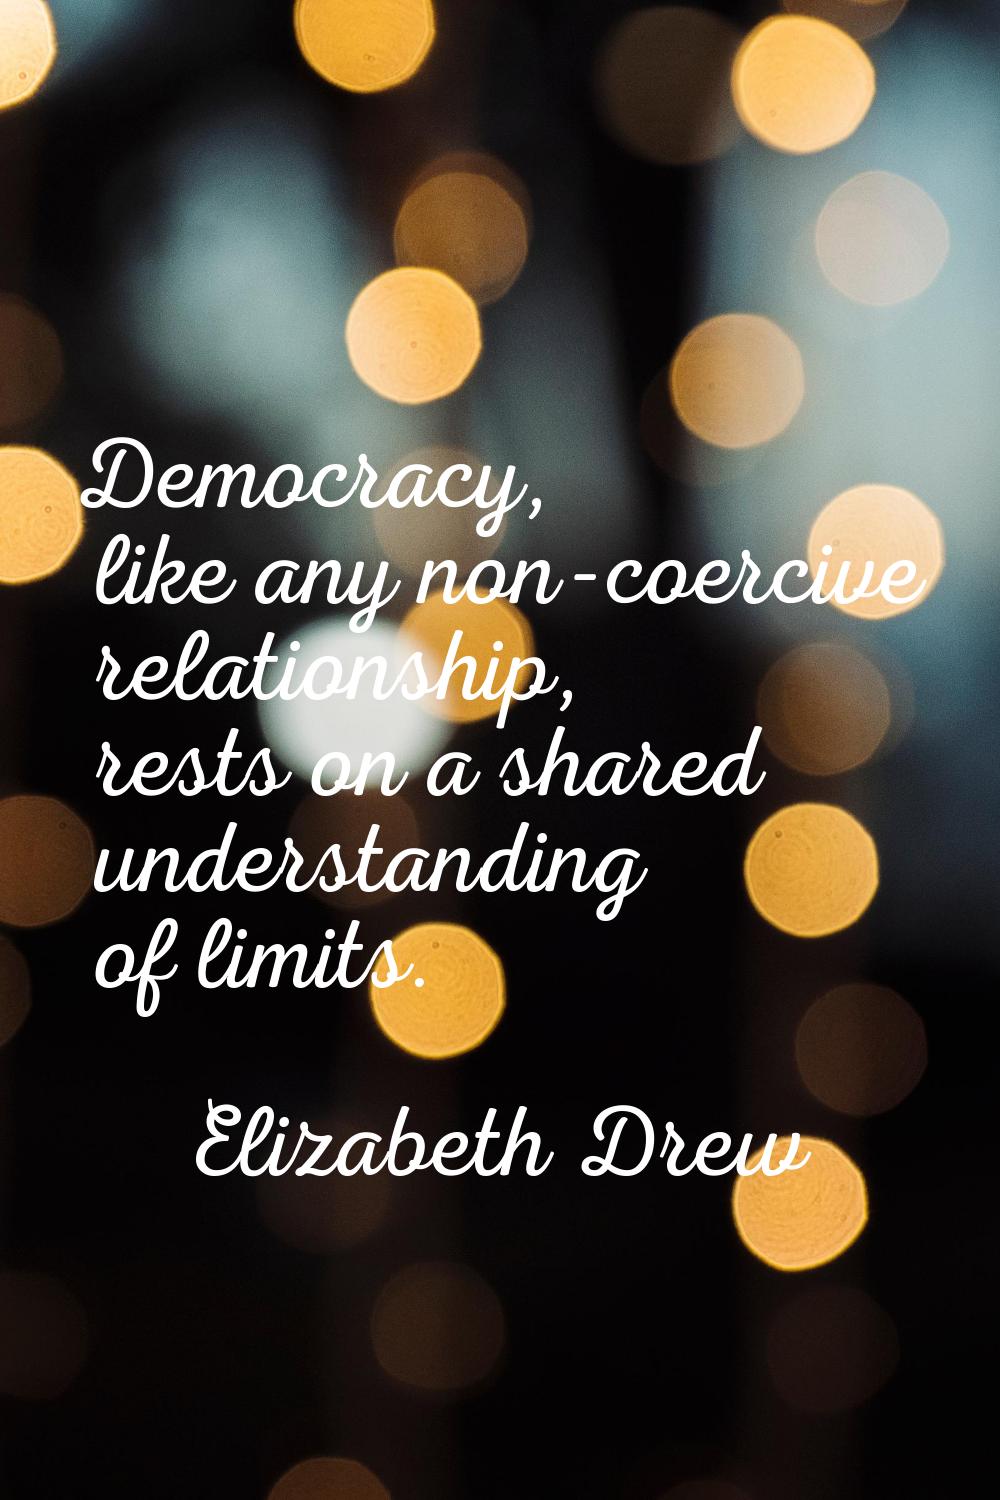 Democracy, like any non-coercive relationship, rests on a shared understanding of limits.